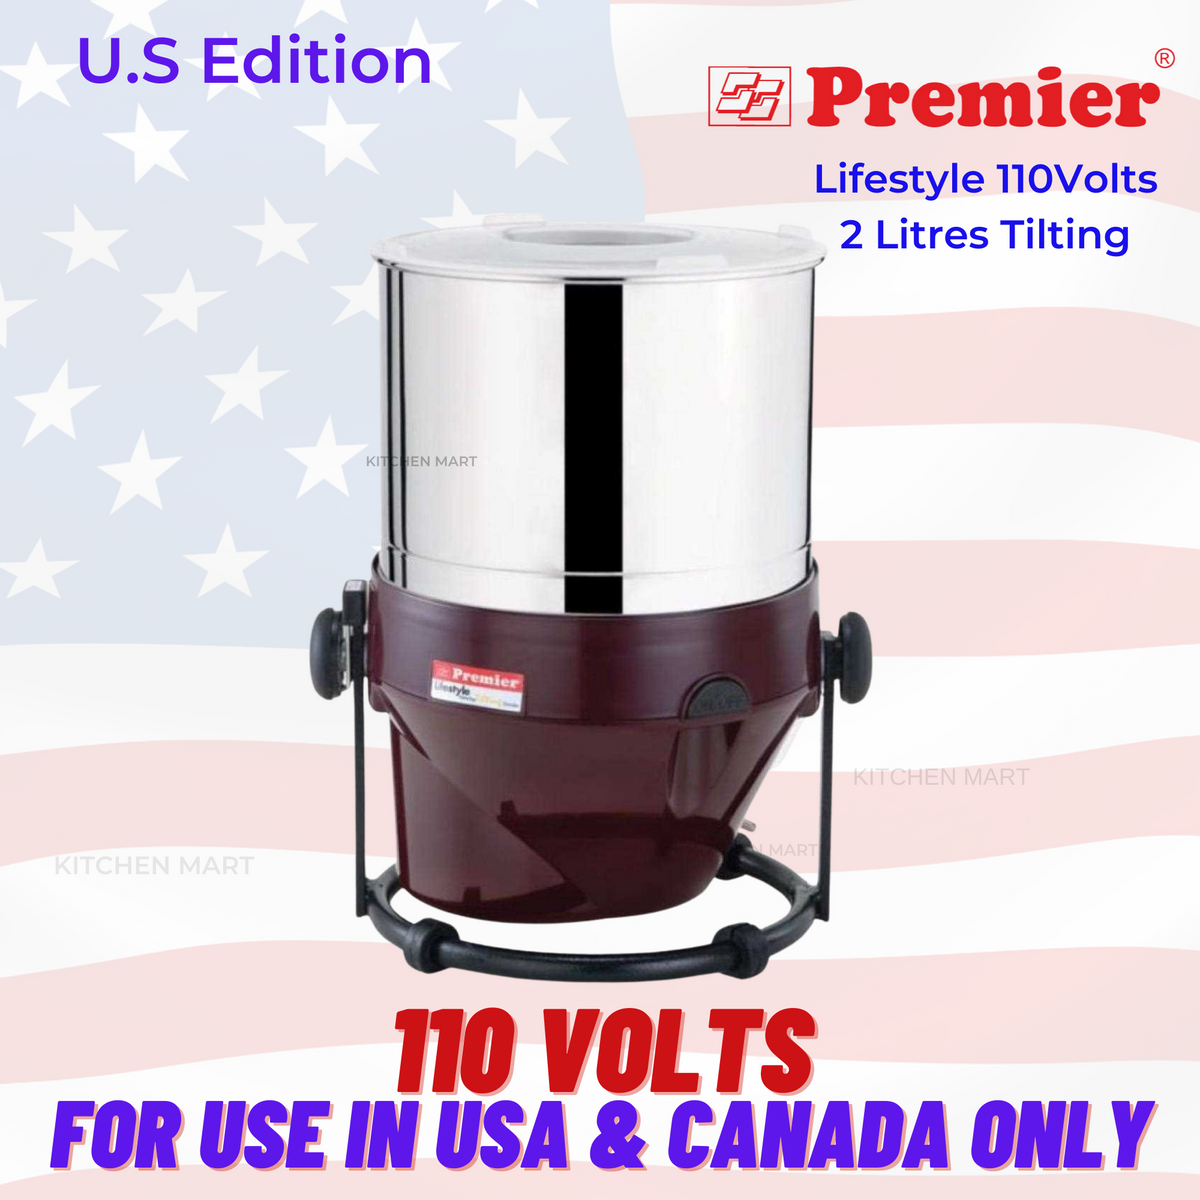 Premier Lifestyle Wet Grinder (Multicolor) 110 volts for use in USA &amp; Canada Only